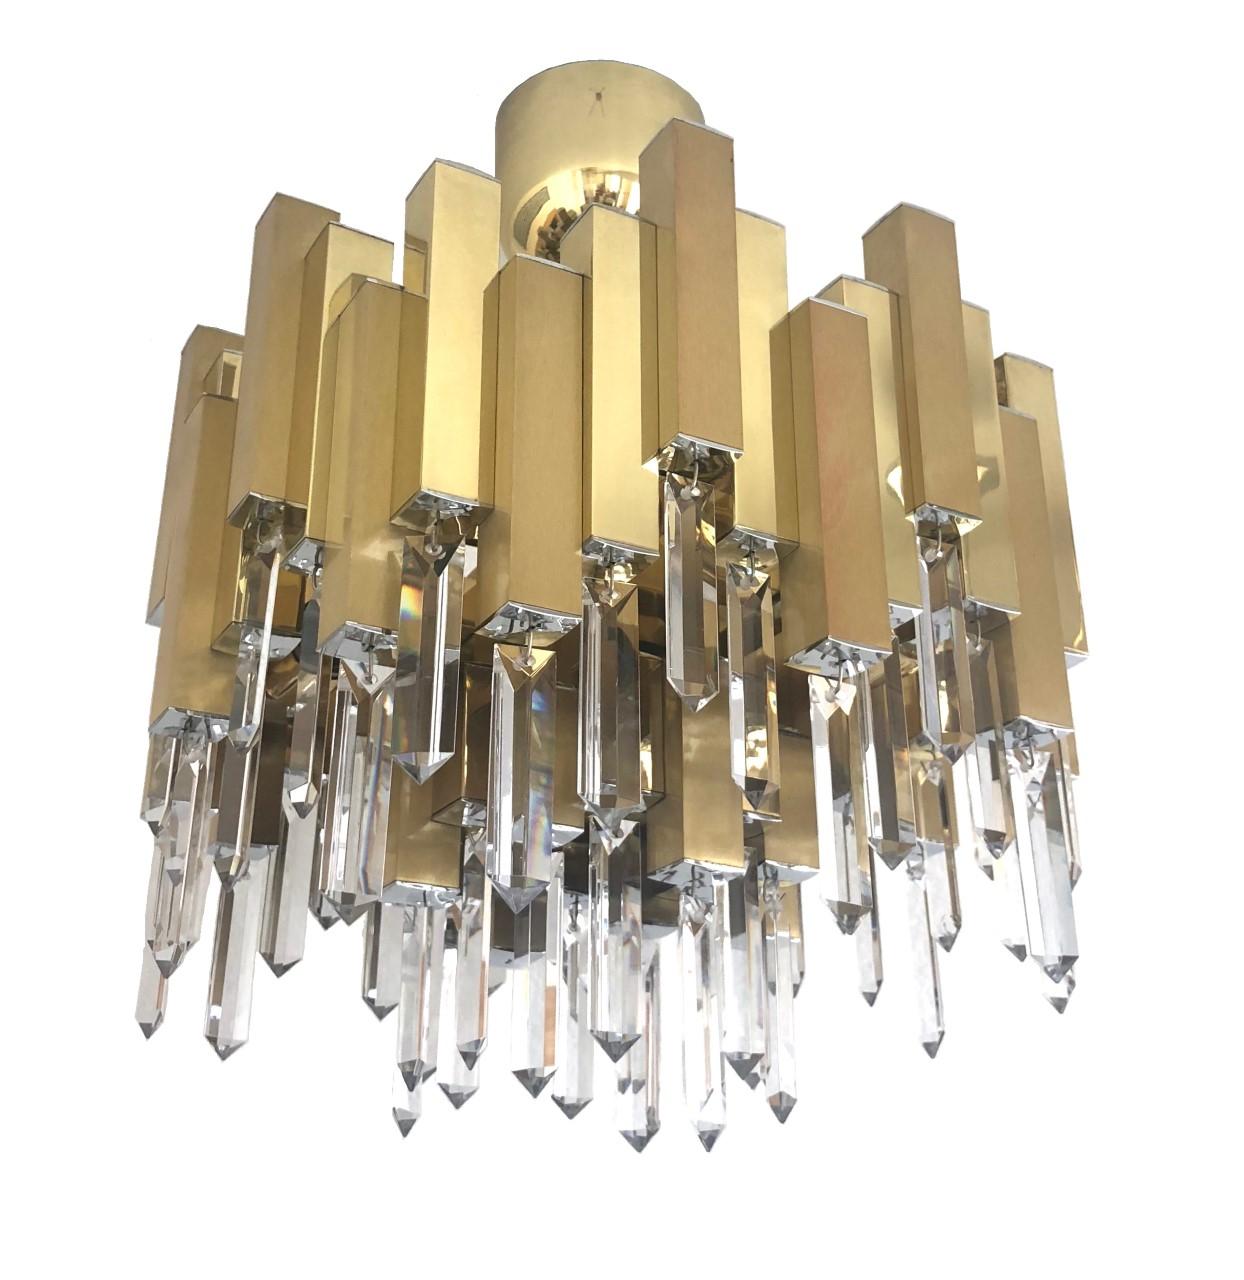 Unique, extraordinary and marvelous midcentury chandelier by Lumica, This chandelier was made during the 1970s in Barcelona (Spain) for the company “LUMICA